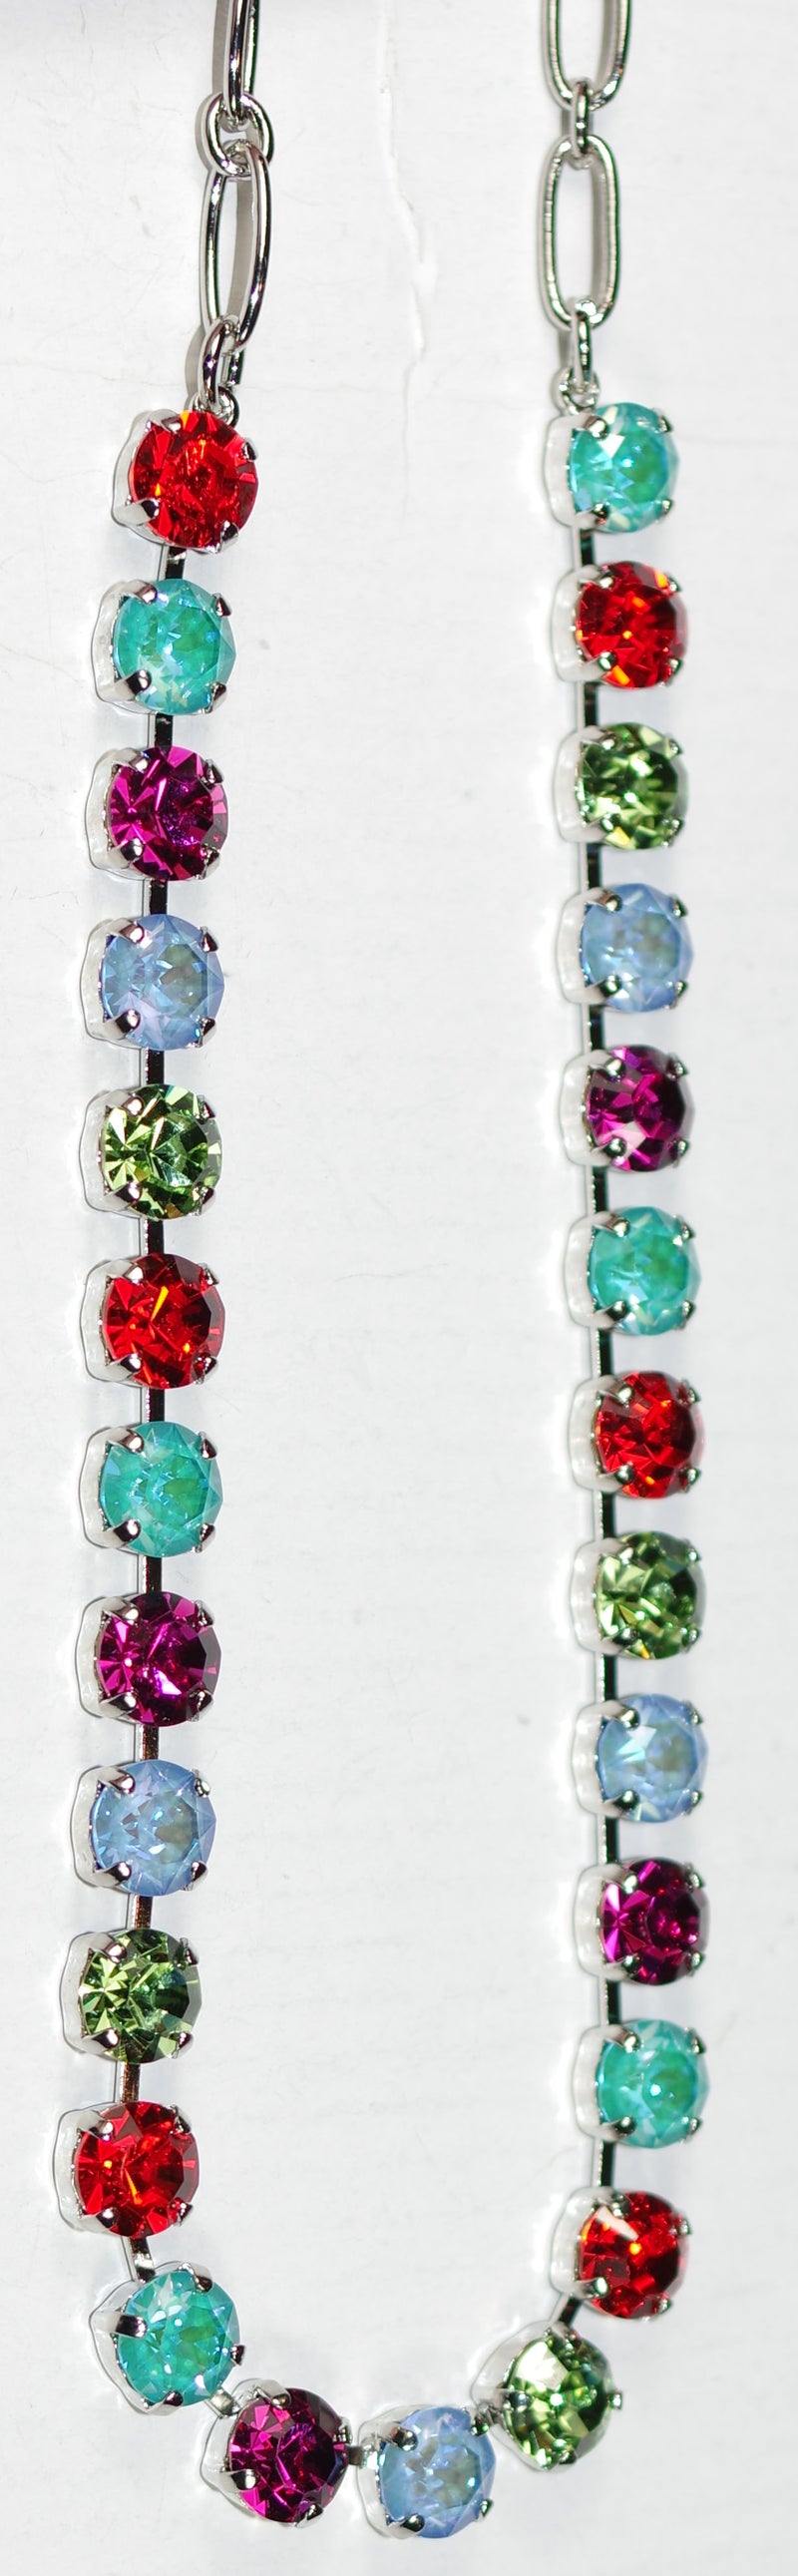 MARIANA NECKLACE BETTE RAINBOW SHERBERT: blue, pink, orange, green, teal 1/4" stones in silver rhodium setting, 17" adjustable chain